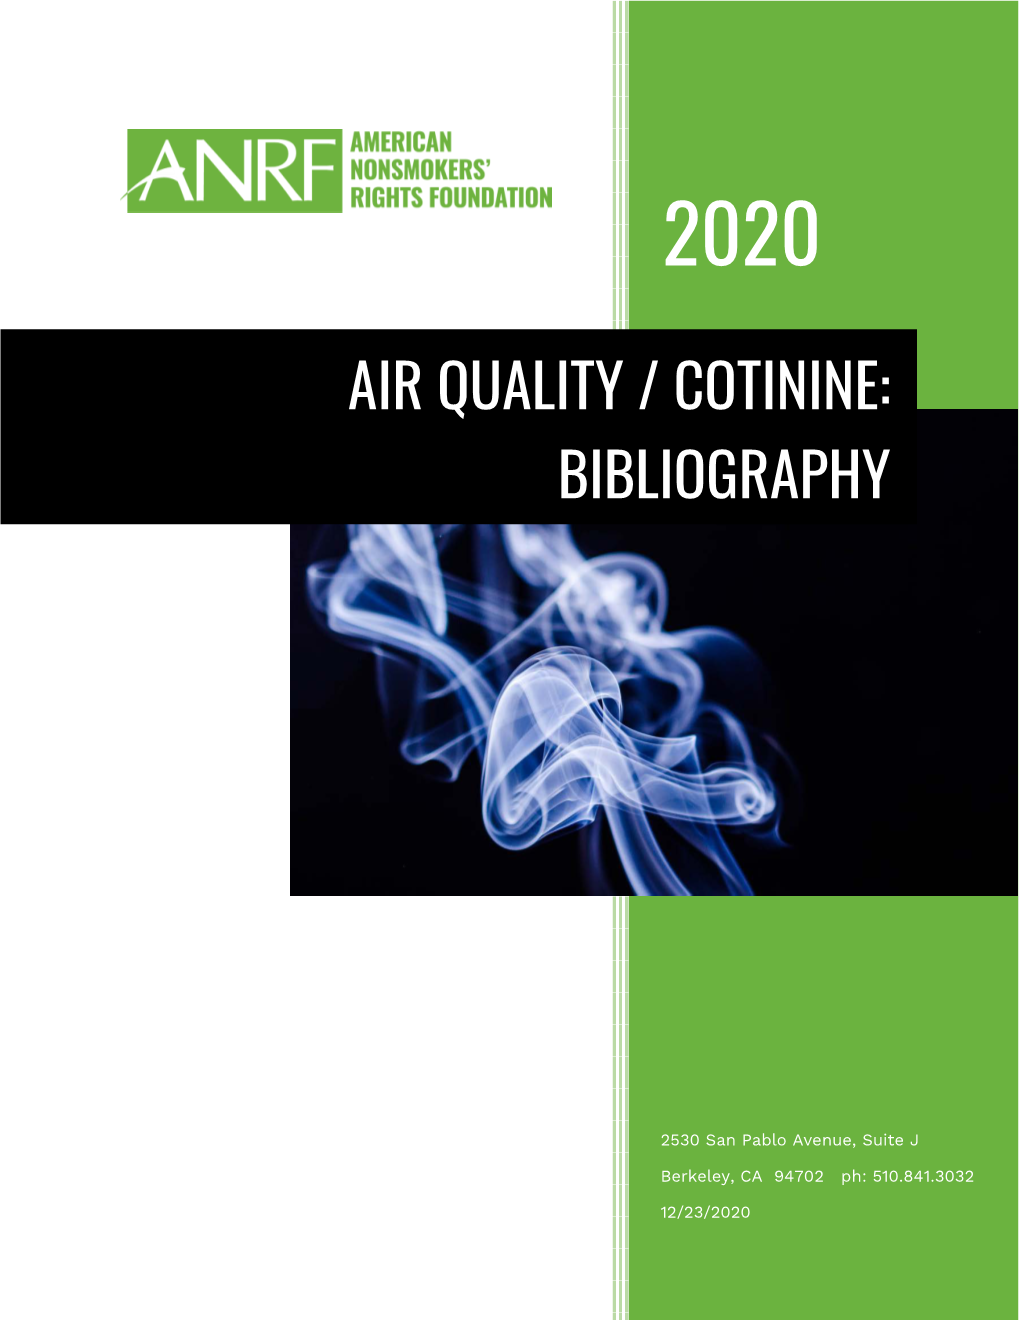 Air Quality / Cotinine: Bibliography